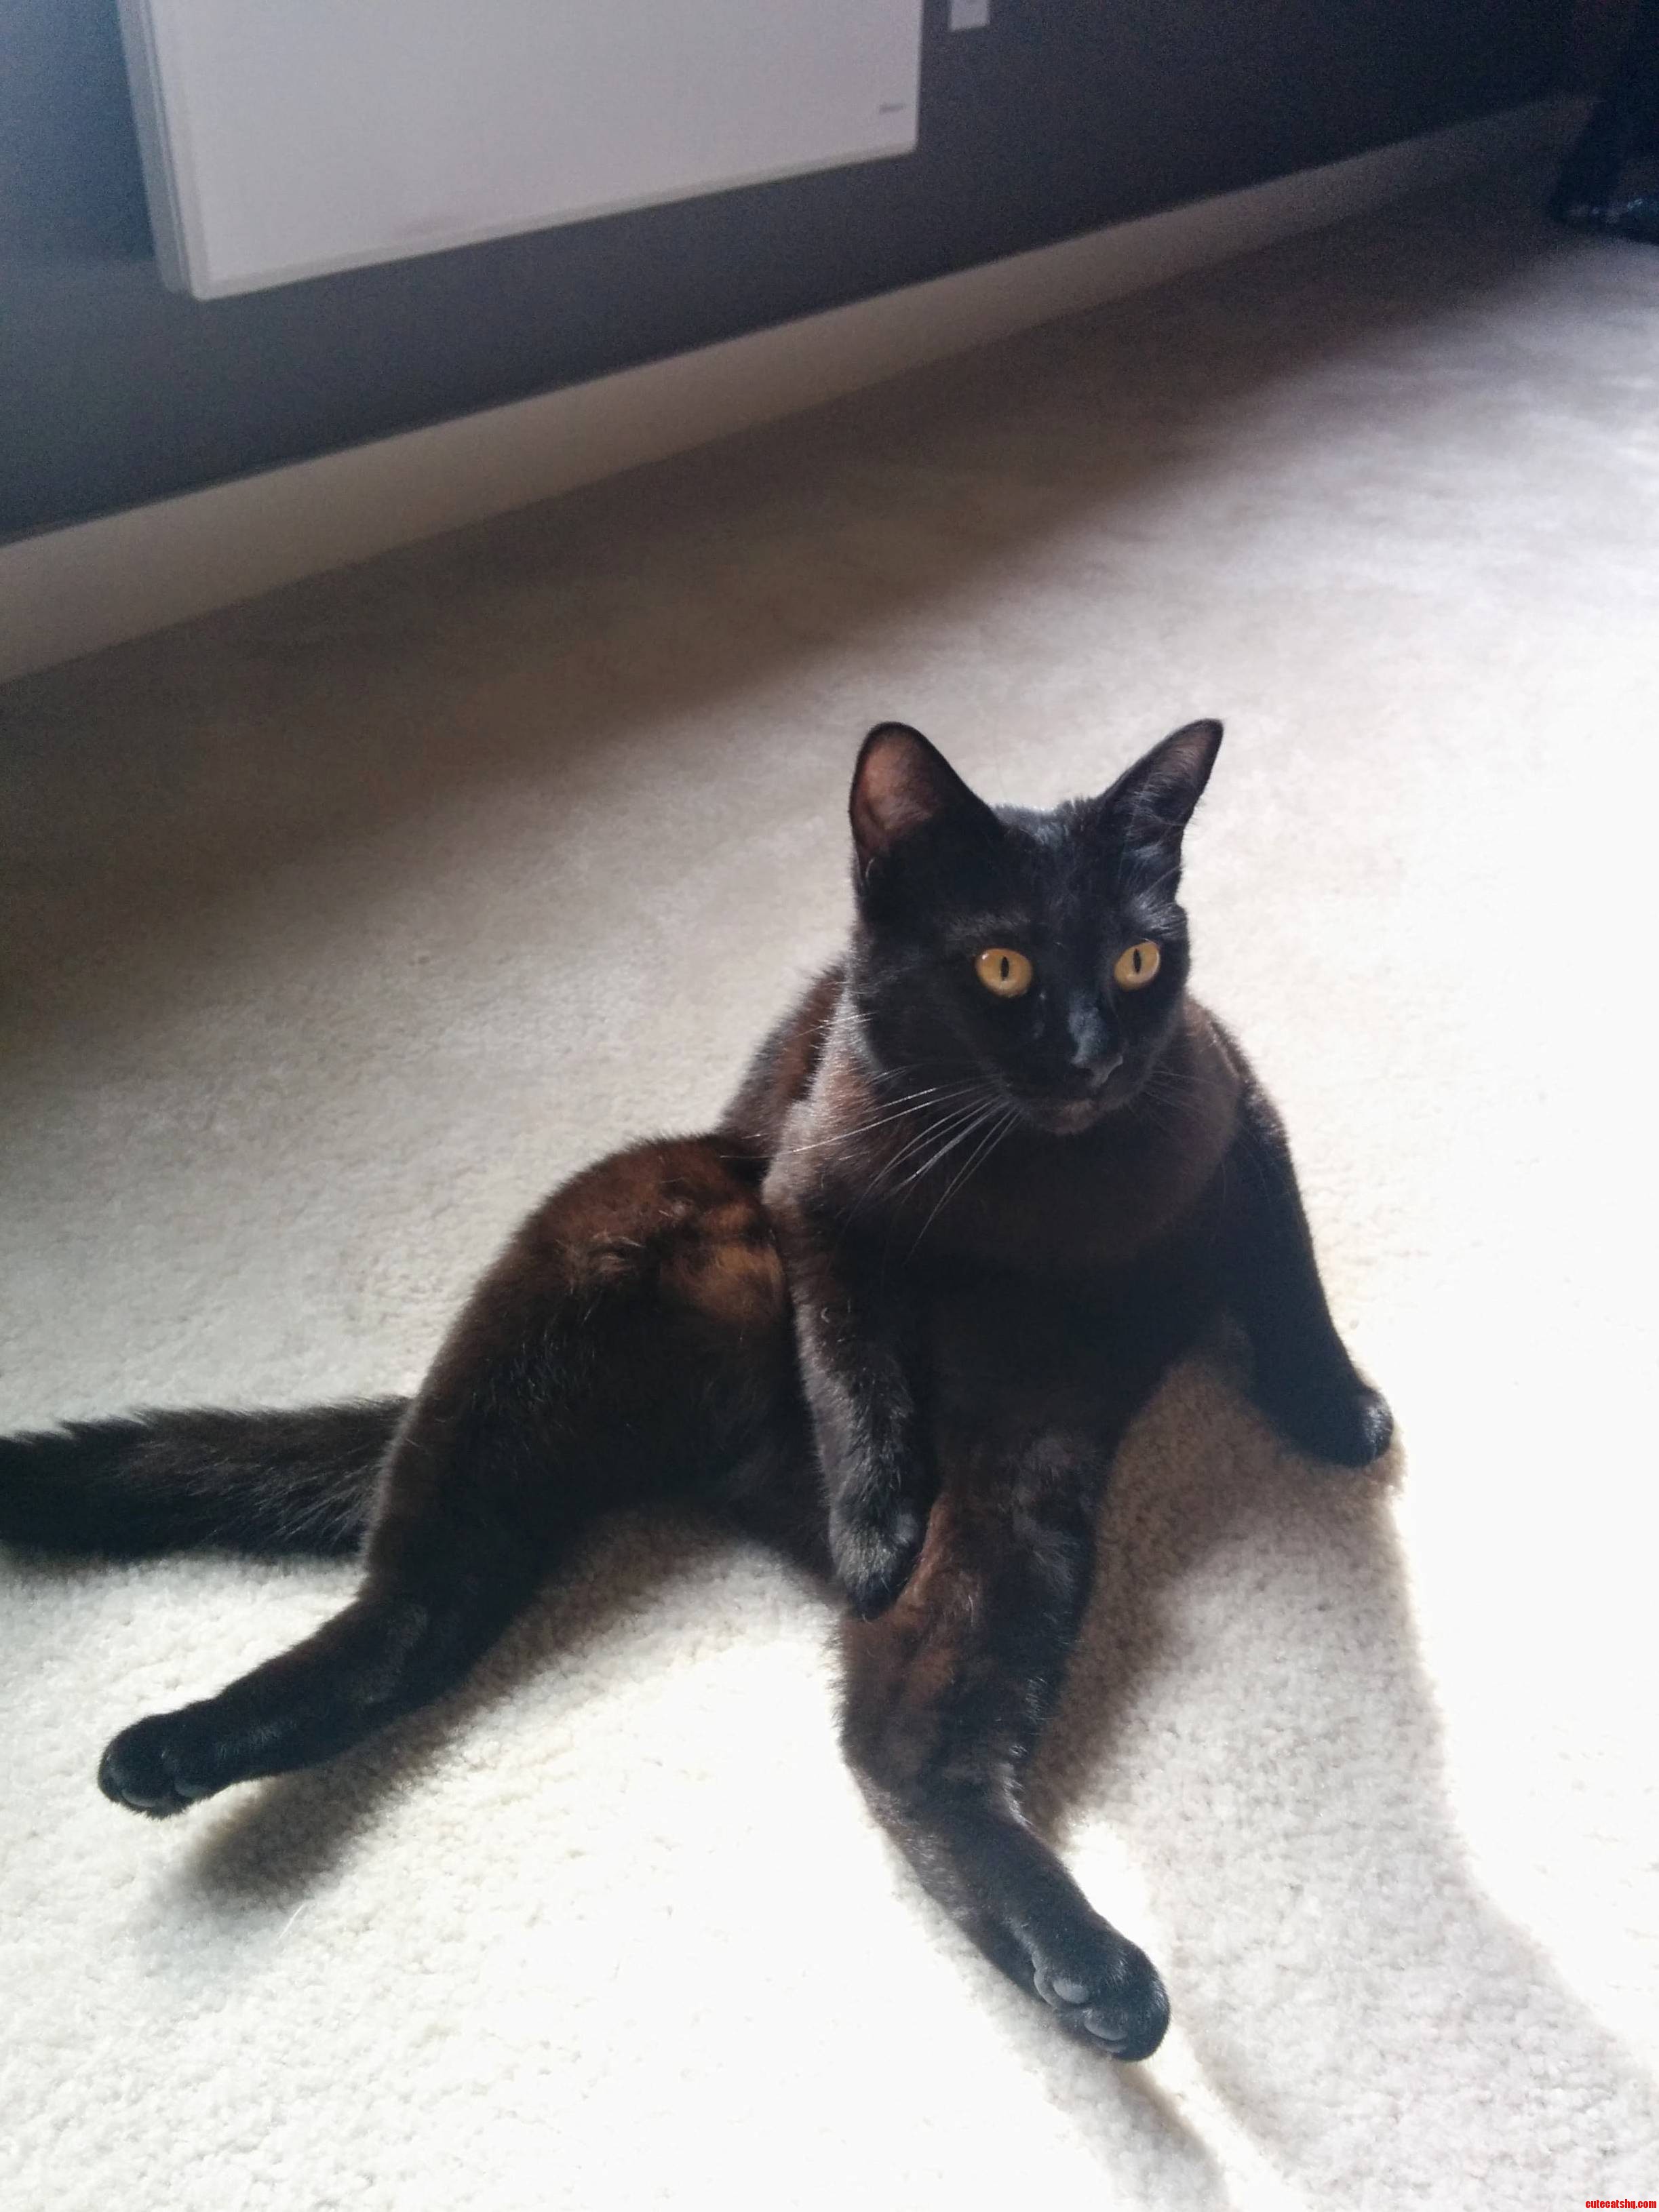 This Is My Little Black Cat Puma. She Sits Like This All The Time